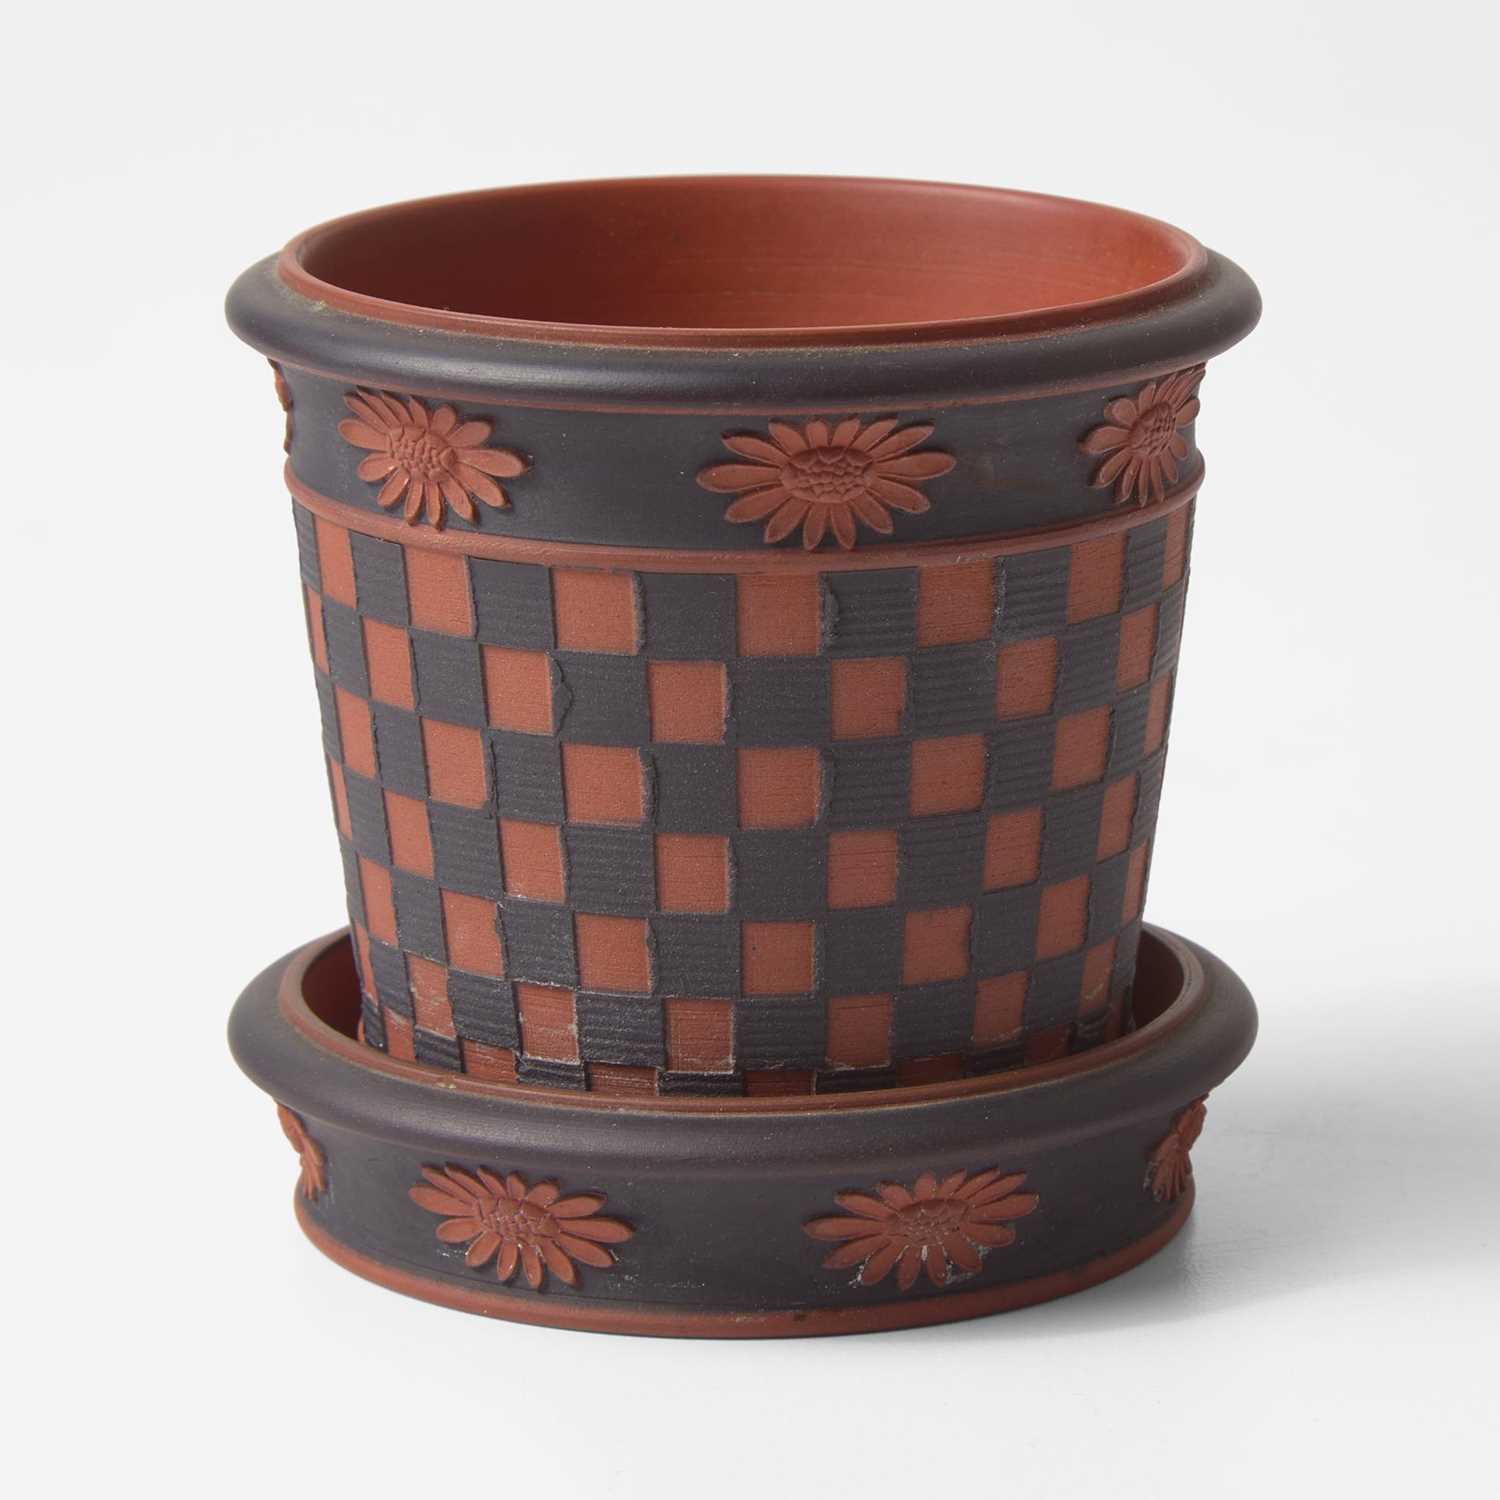 Lot 33 - A Small Wedgwood Rosso Antico and Black Basalt Diced Jardiniere and Liner